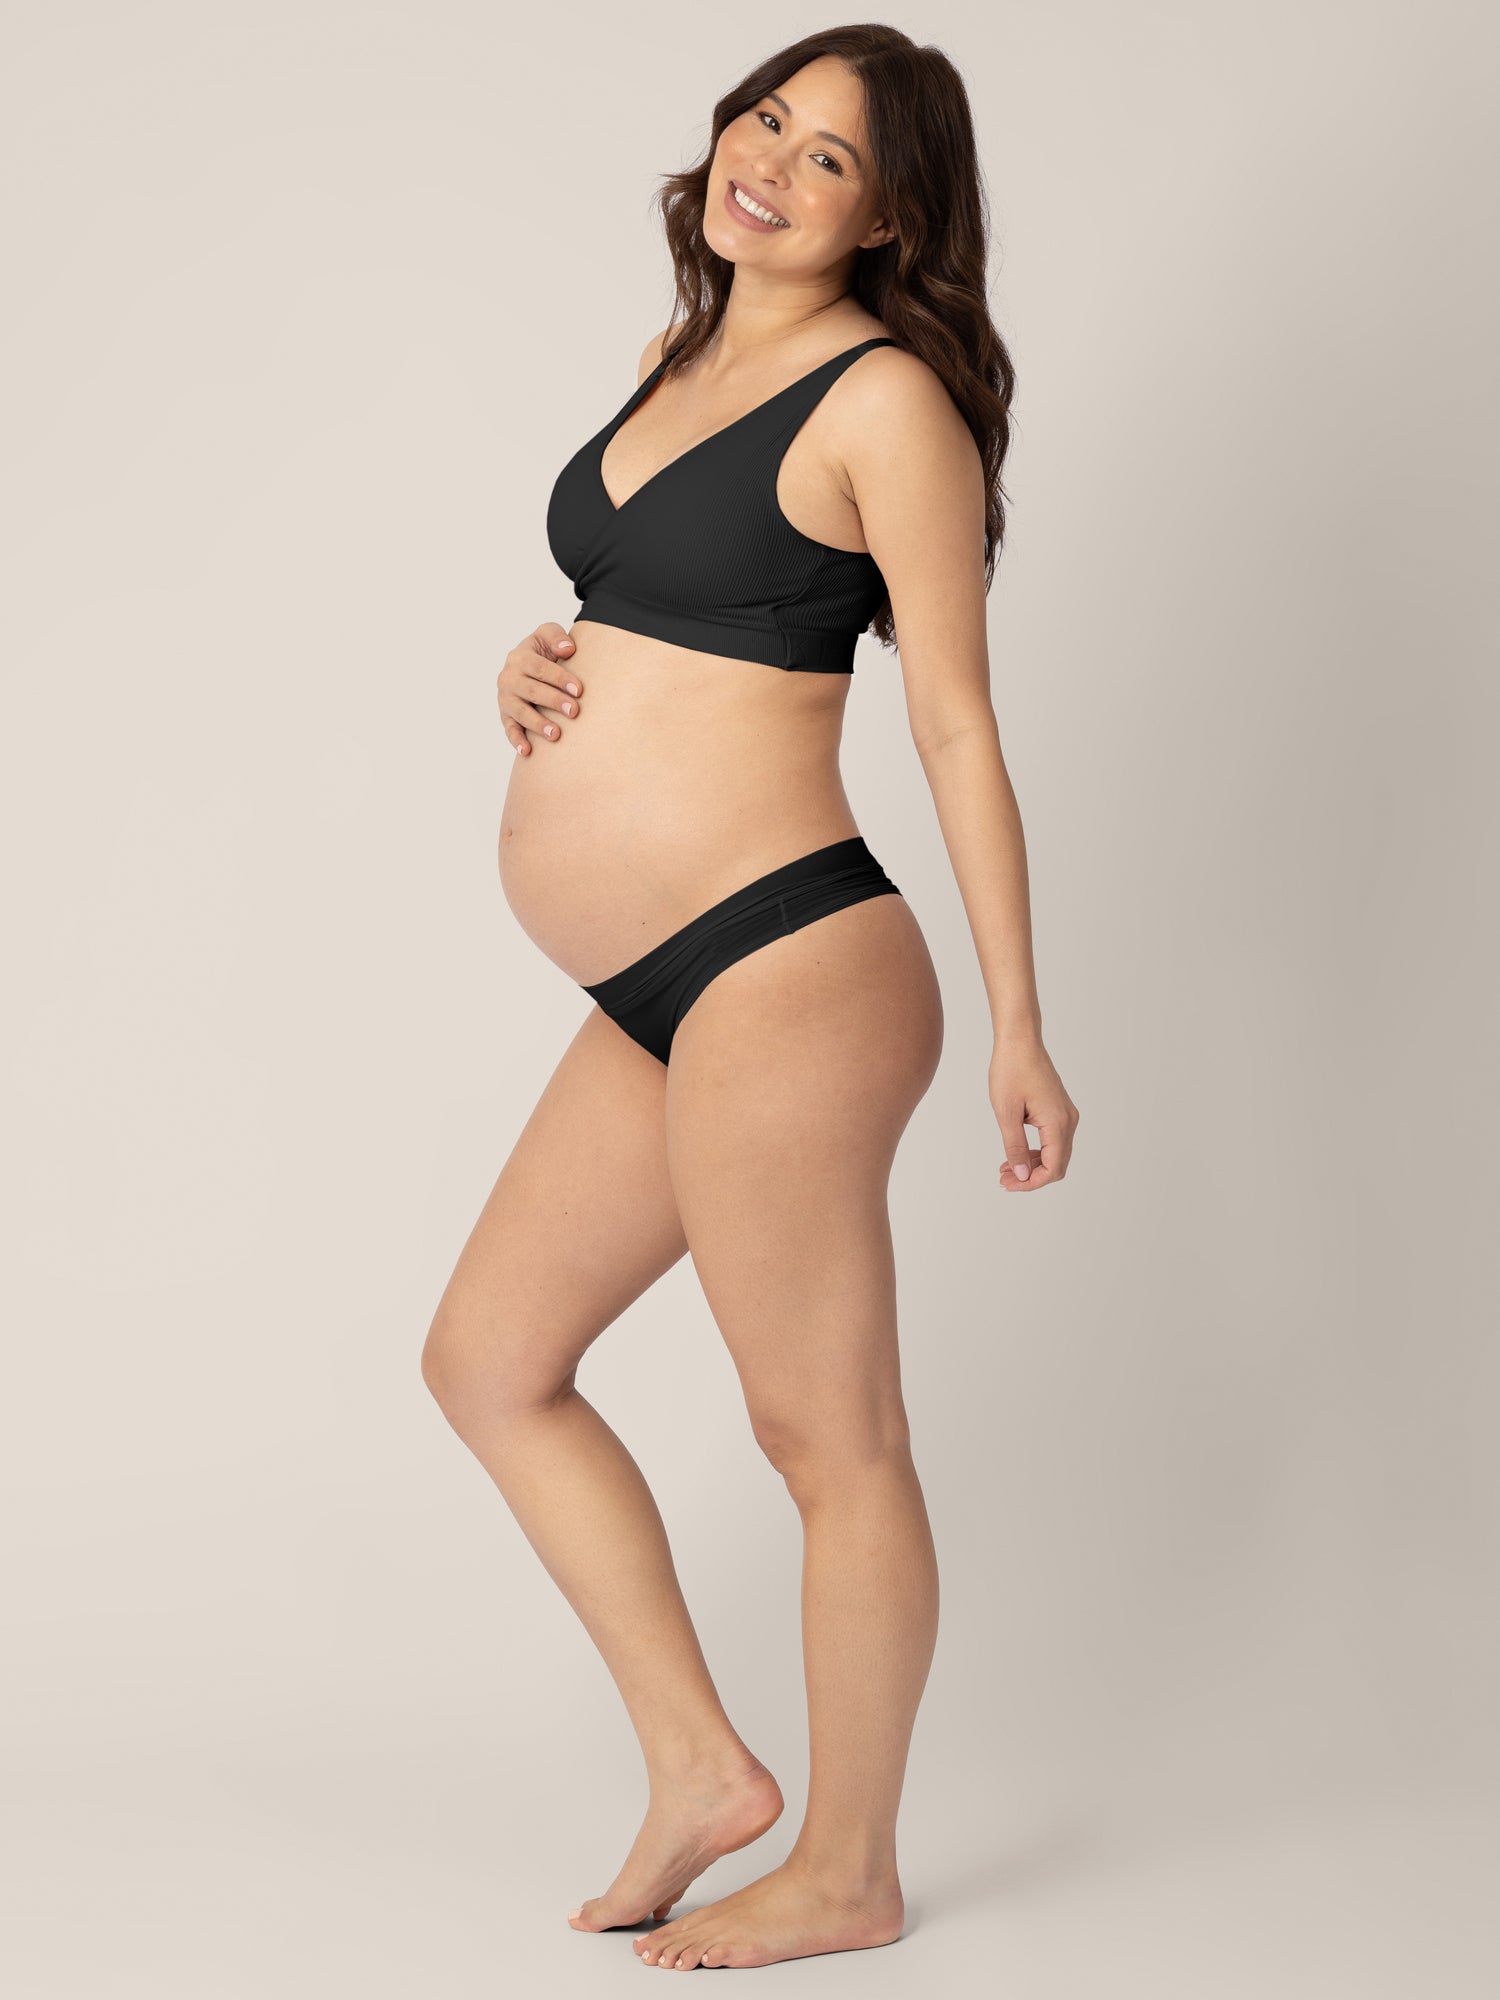 Pregnant model with her hand on her stomach and her other hand at her side smiling at the camera and wearing the Grow with Me™ Maternity & Postpartum Thong in Black